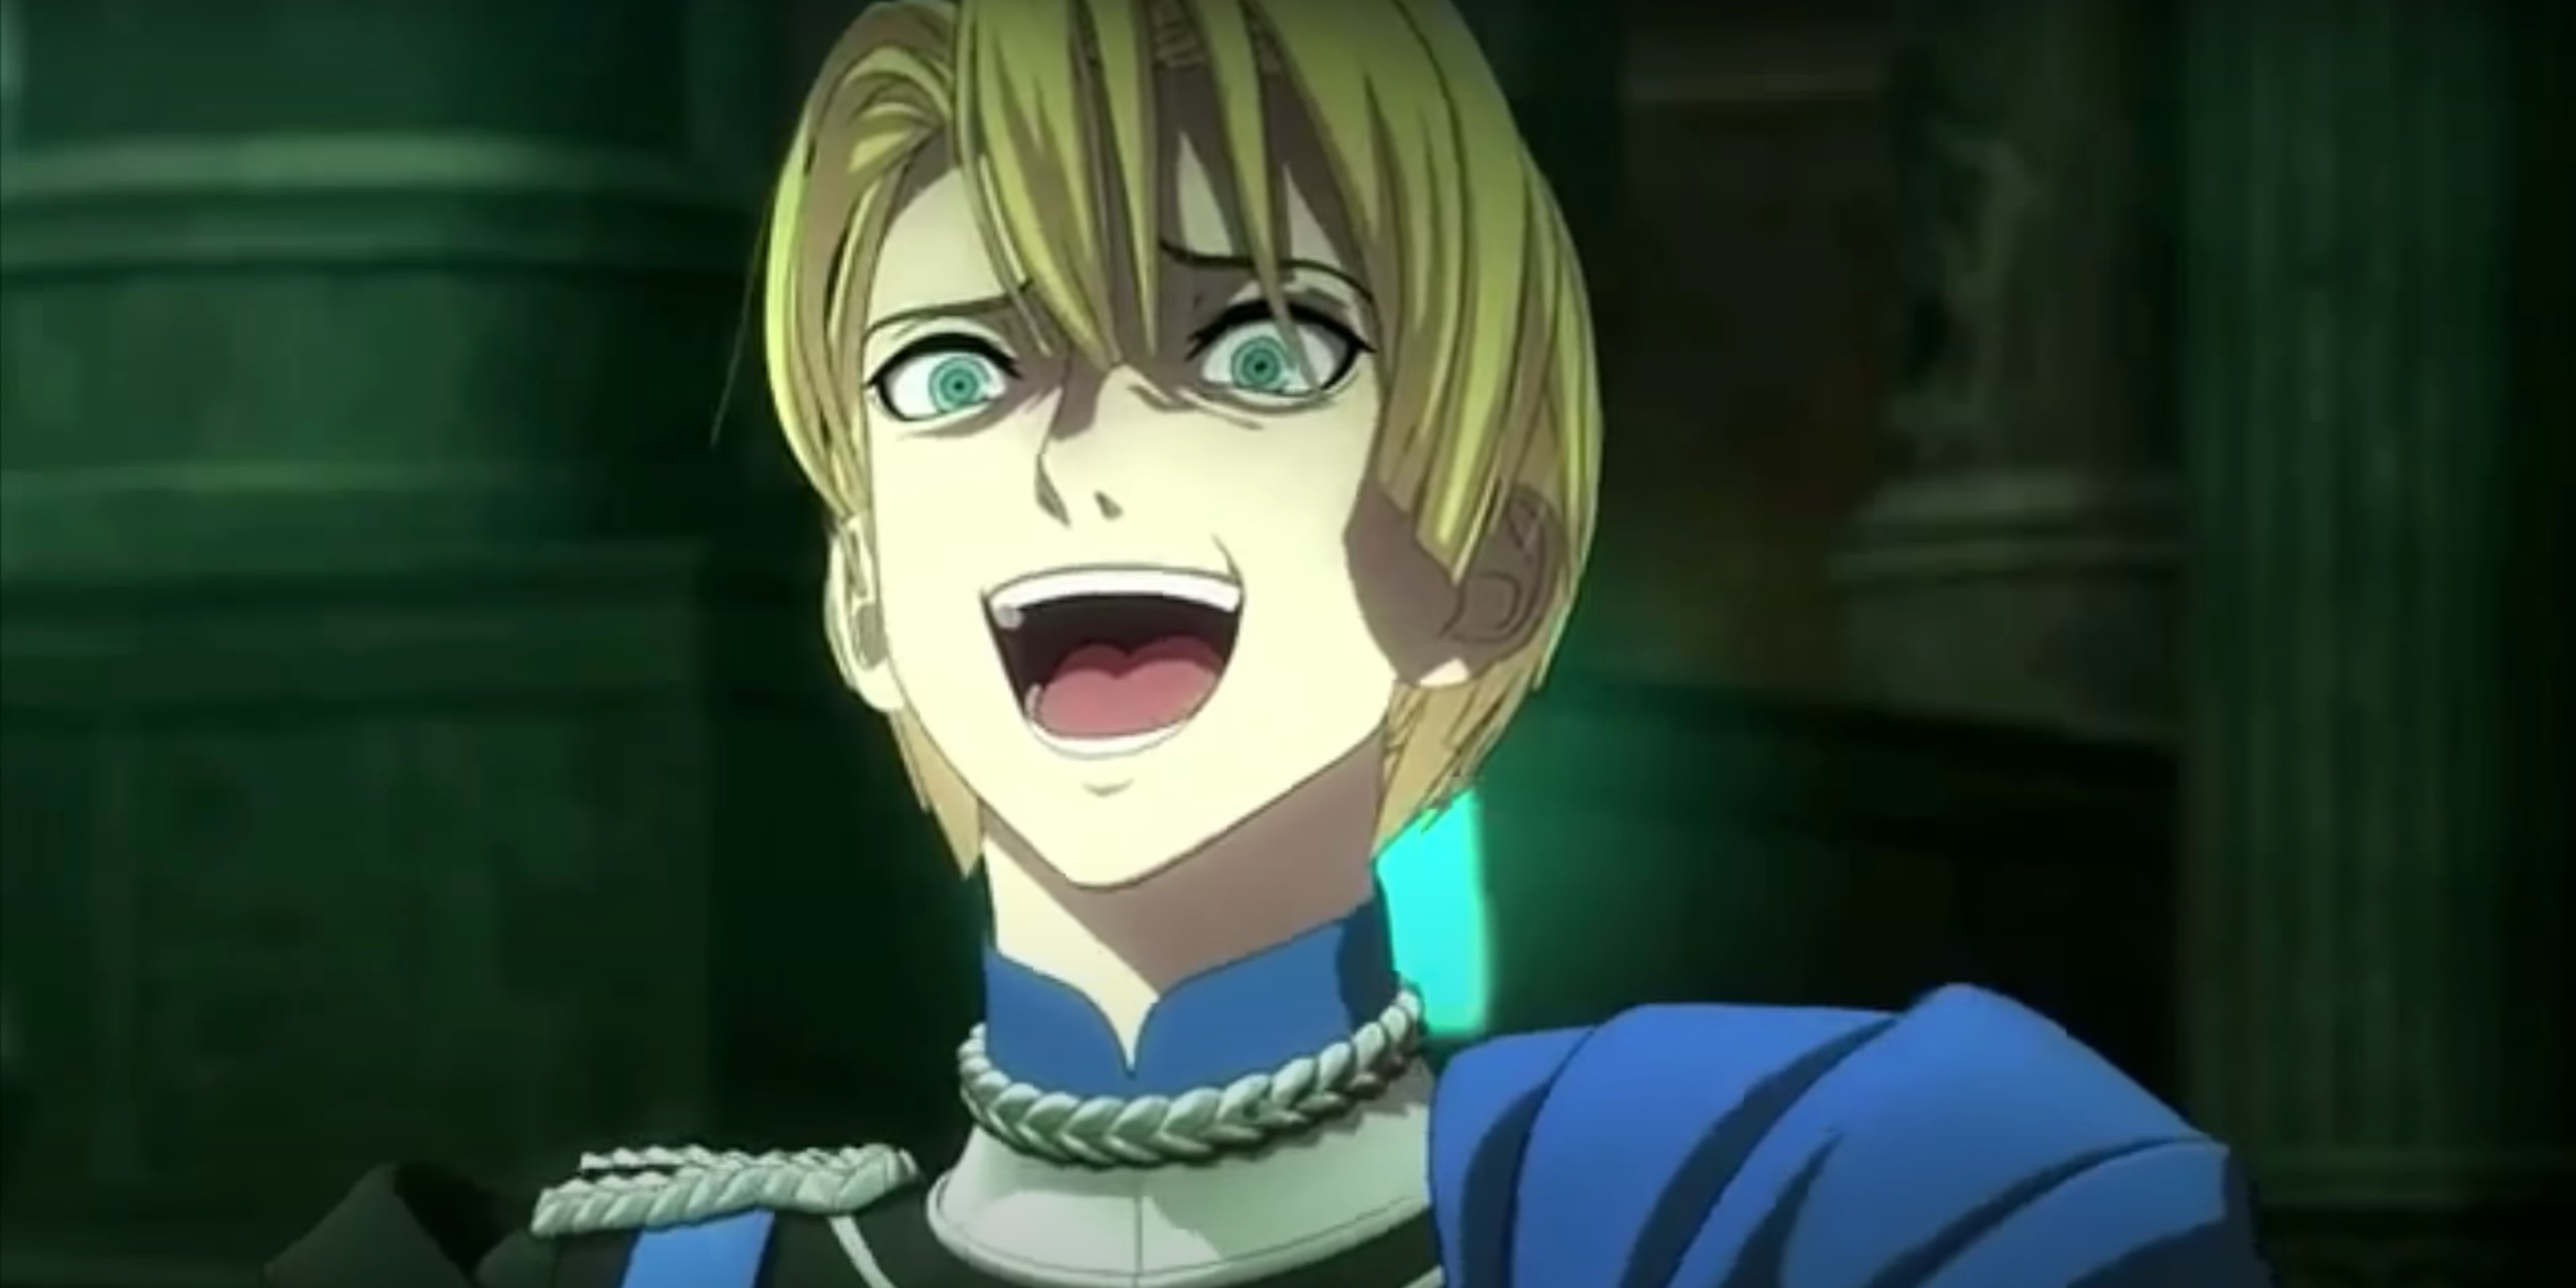 An image of Dimitri from Fire Emblem in the throes of mad laughter.